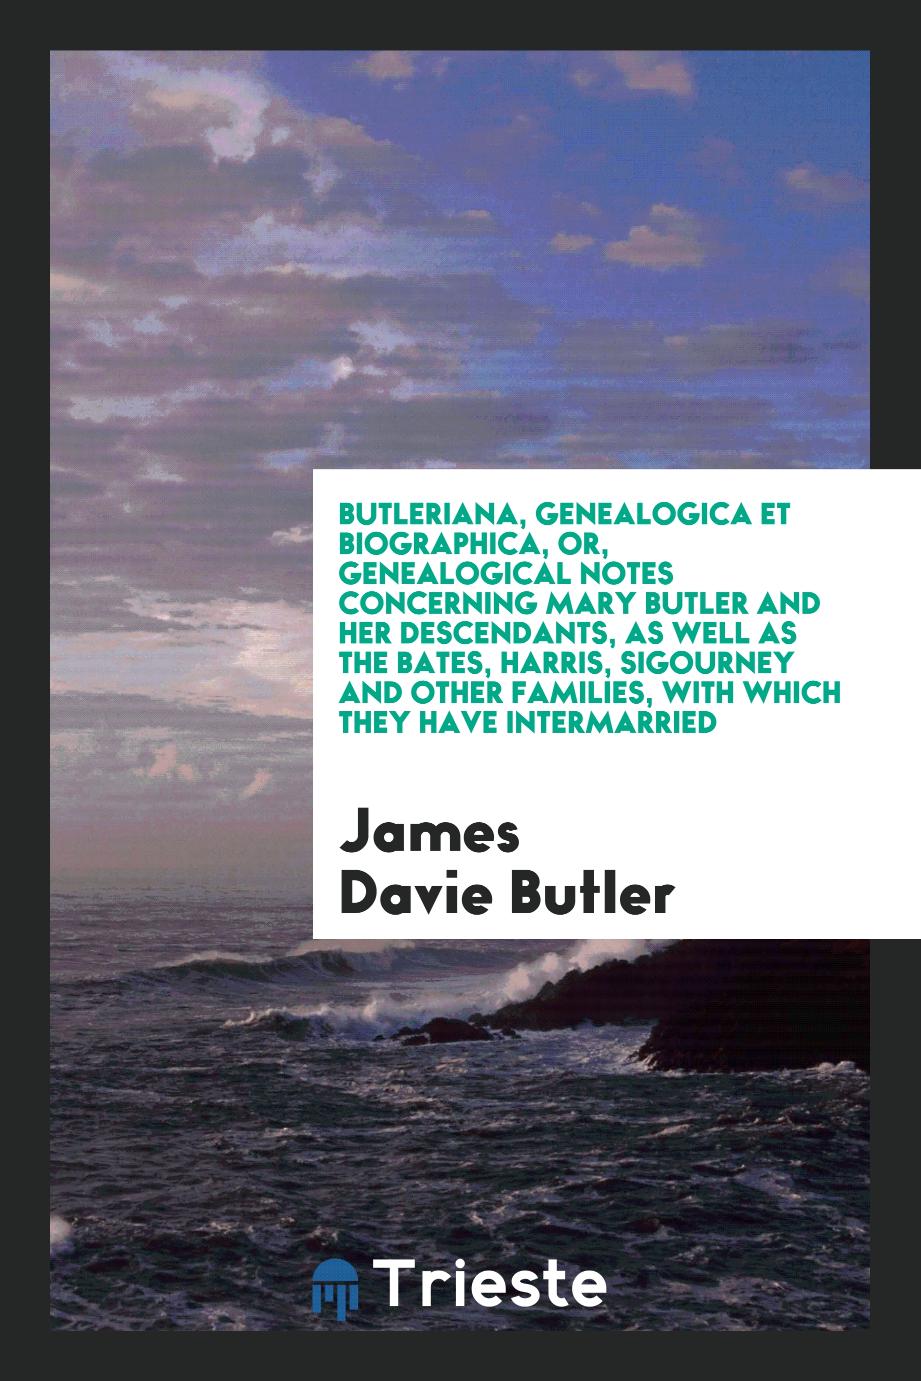 Butleriana, Genealogica Et Biographica, or, Genealogical Notes Concerning Mary Butler and Her Descendants, as Well as the Bates, Harris, Sigourney and Other Families, with Which They Have Intermarried